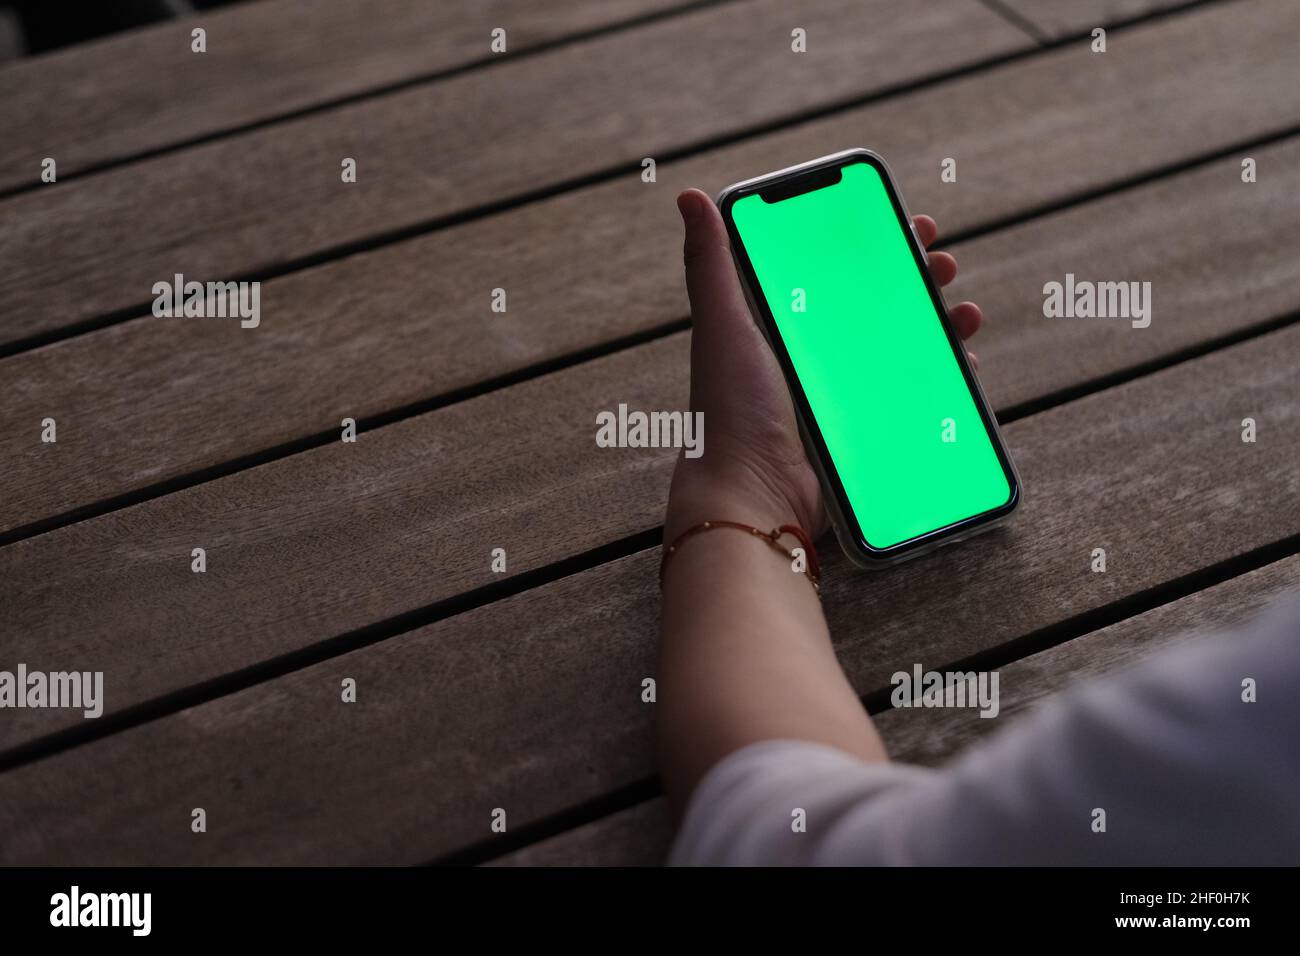 over the shoulder view of hand holding green screen mobile phone on wooden cafe table at night Stock Photo